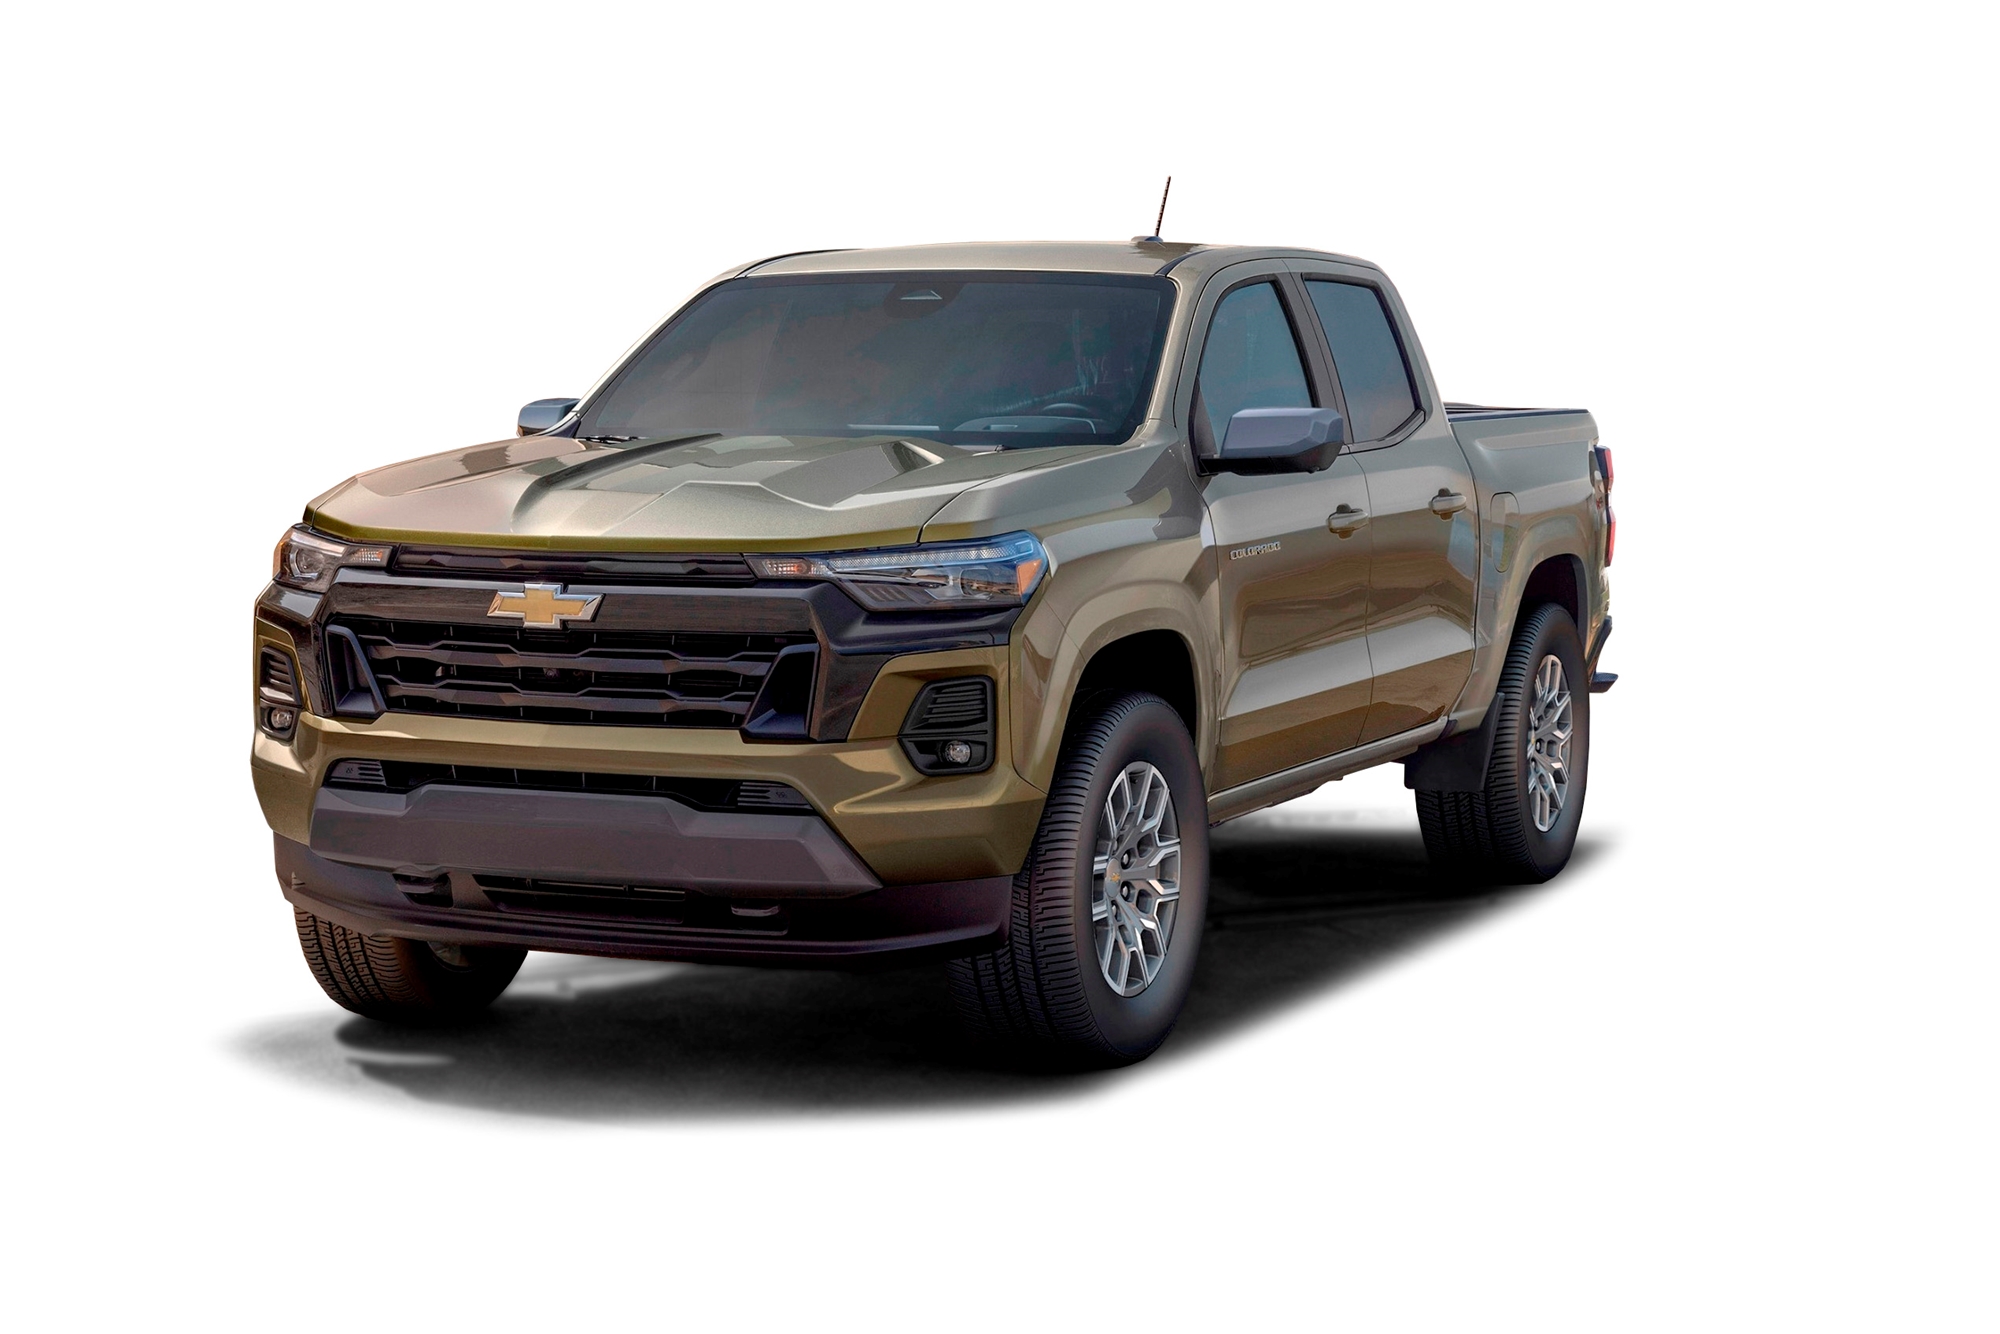 2023-chevrolet-colorado-zr2-full-specs-features-and-price-carbuzz